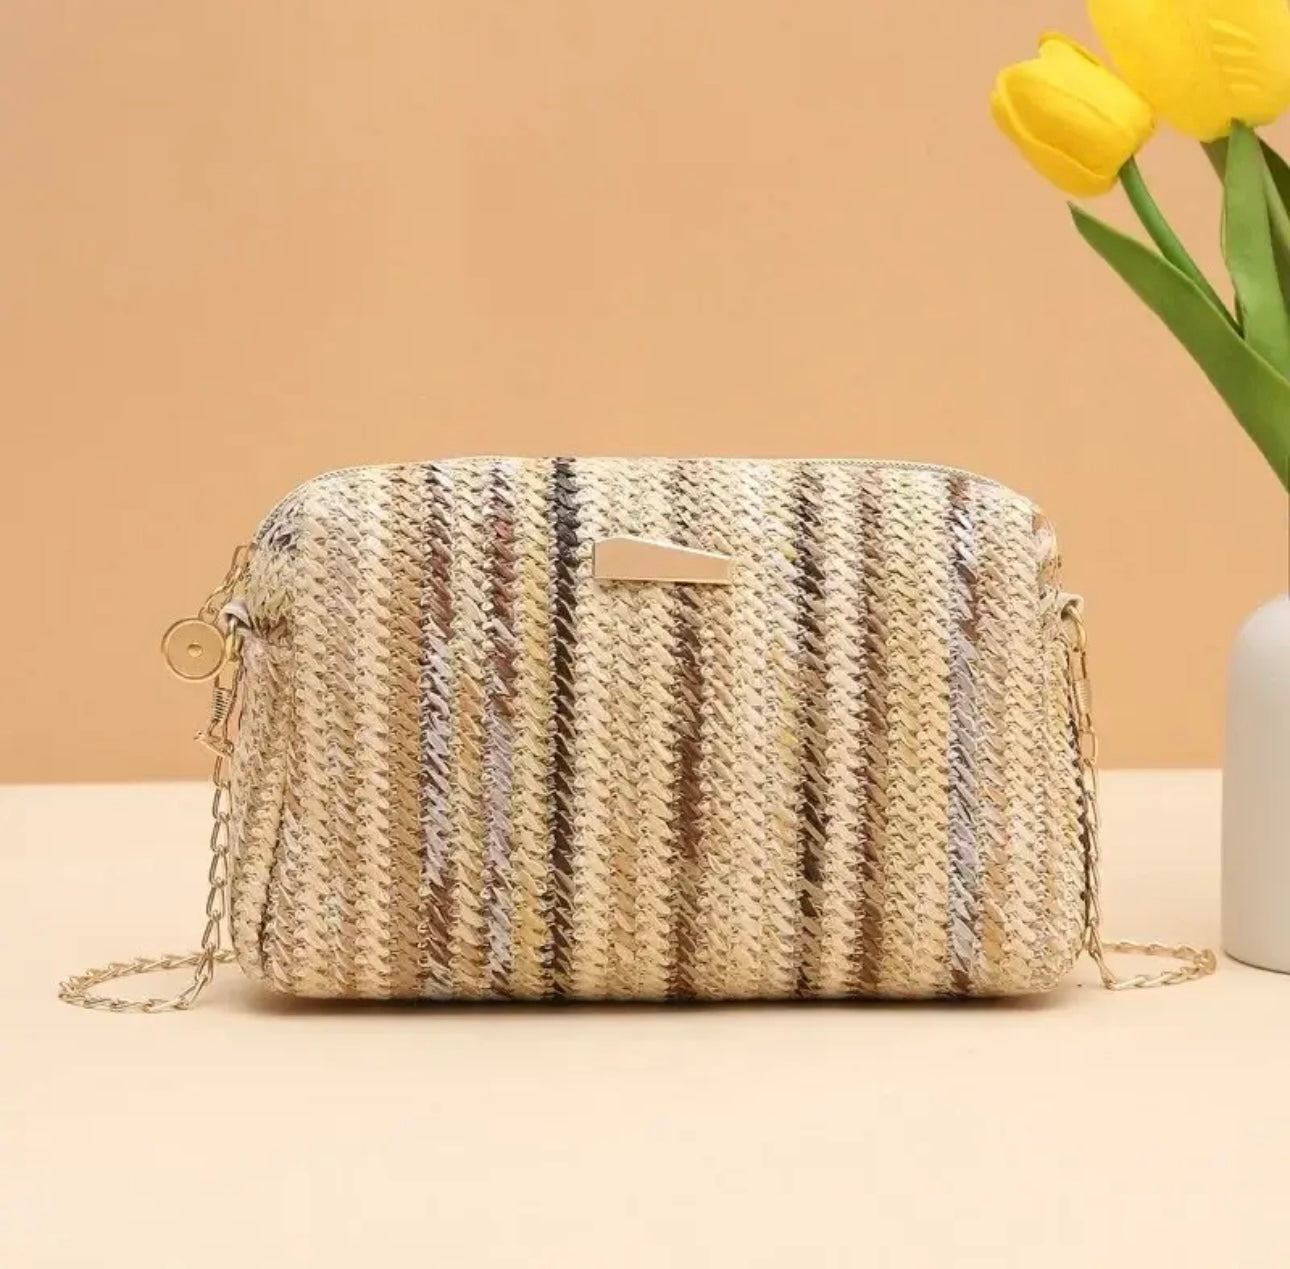 The Knitted Handbag (Comes In Other Colors